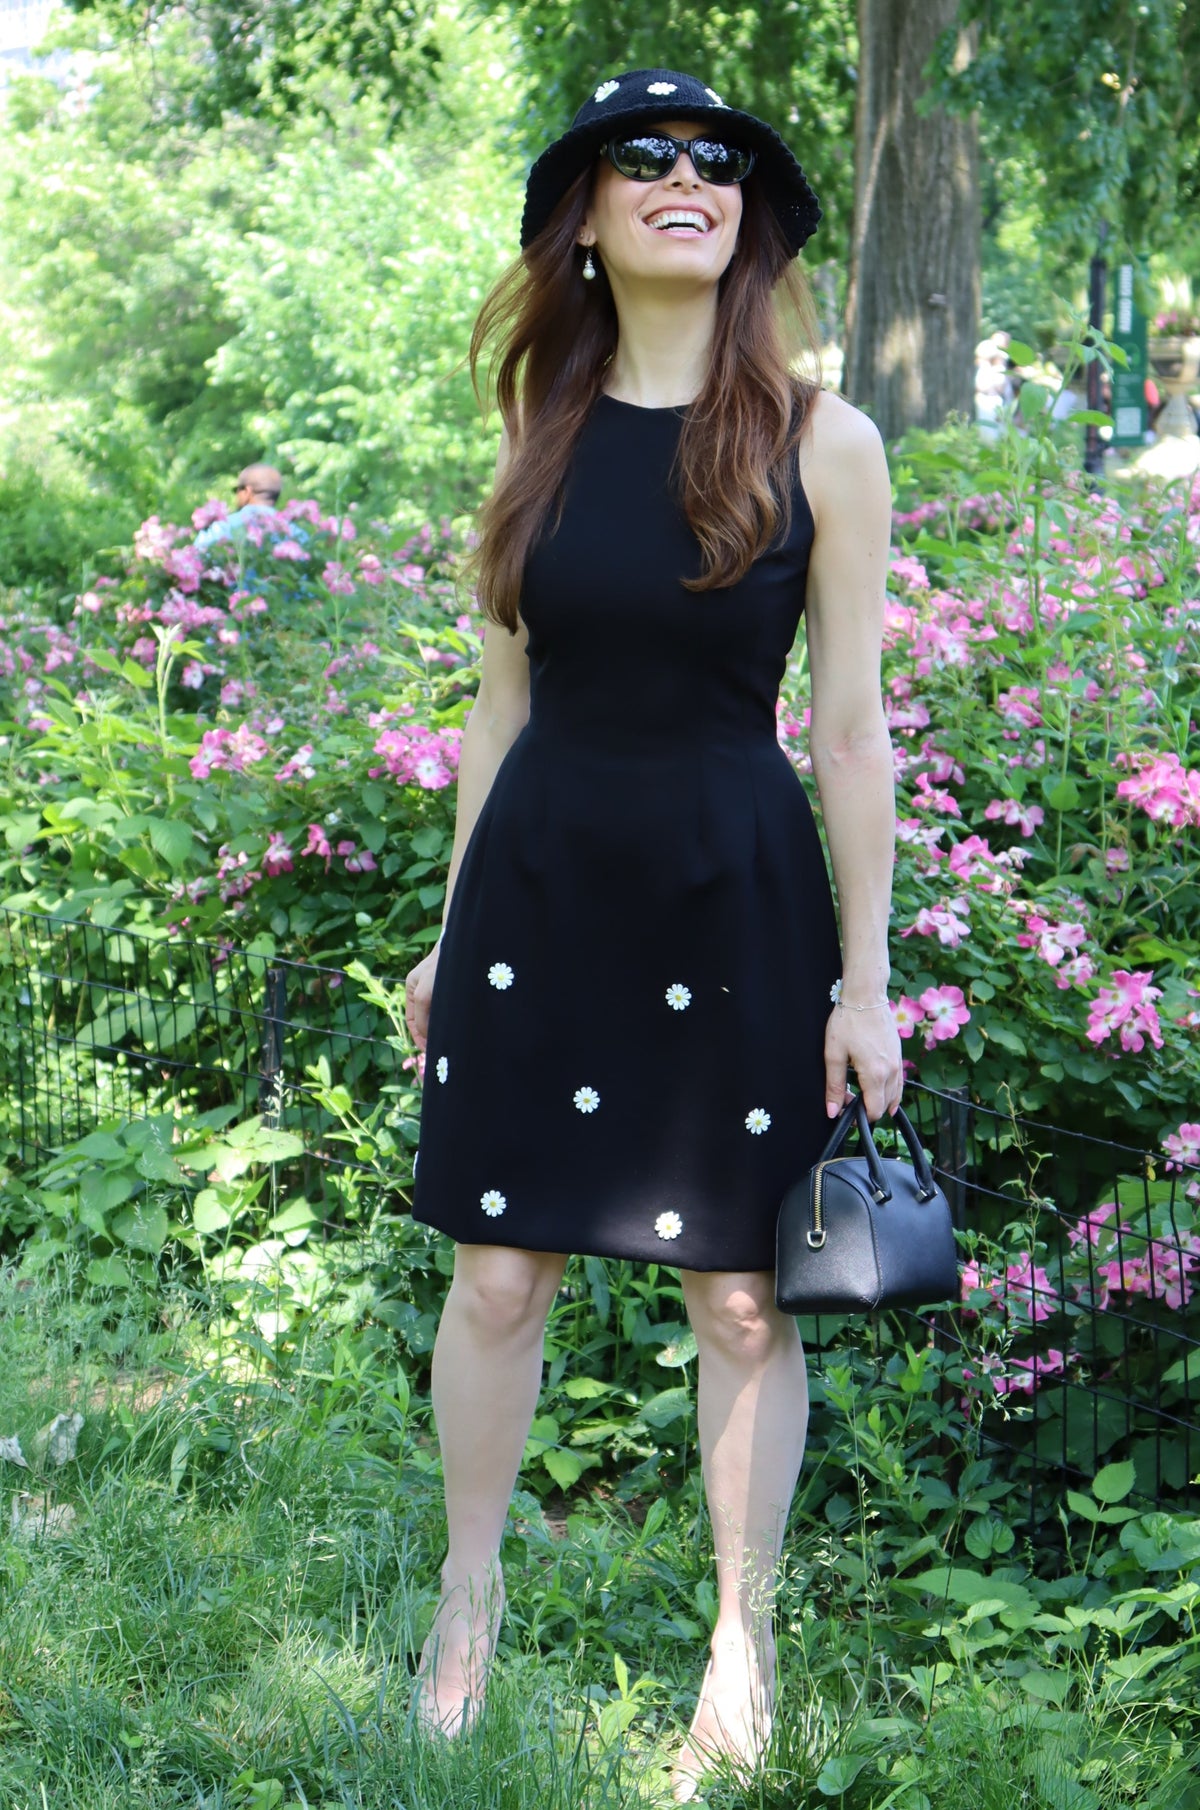 Model in a black dress with white daisy appliques and matching hat looking up standing in front of pink flowers.